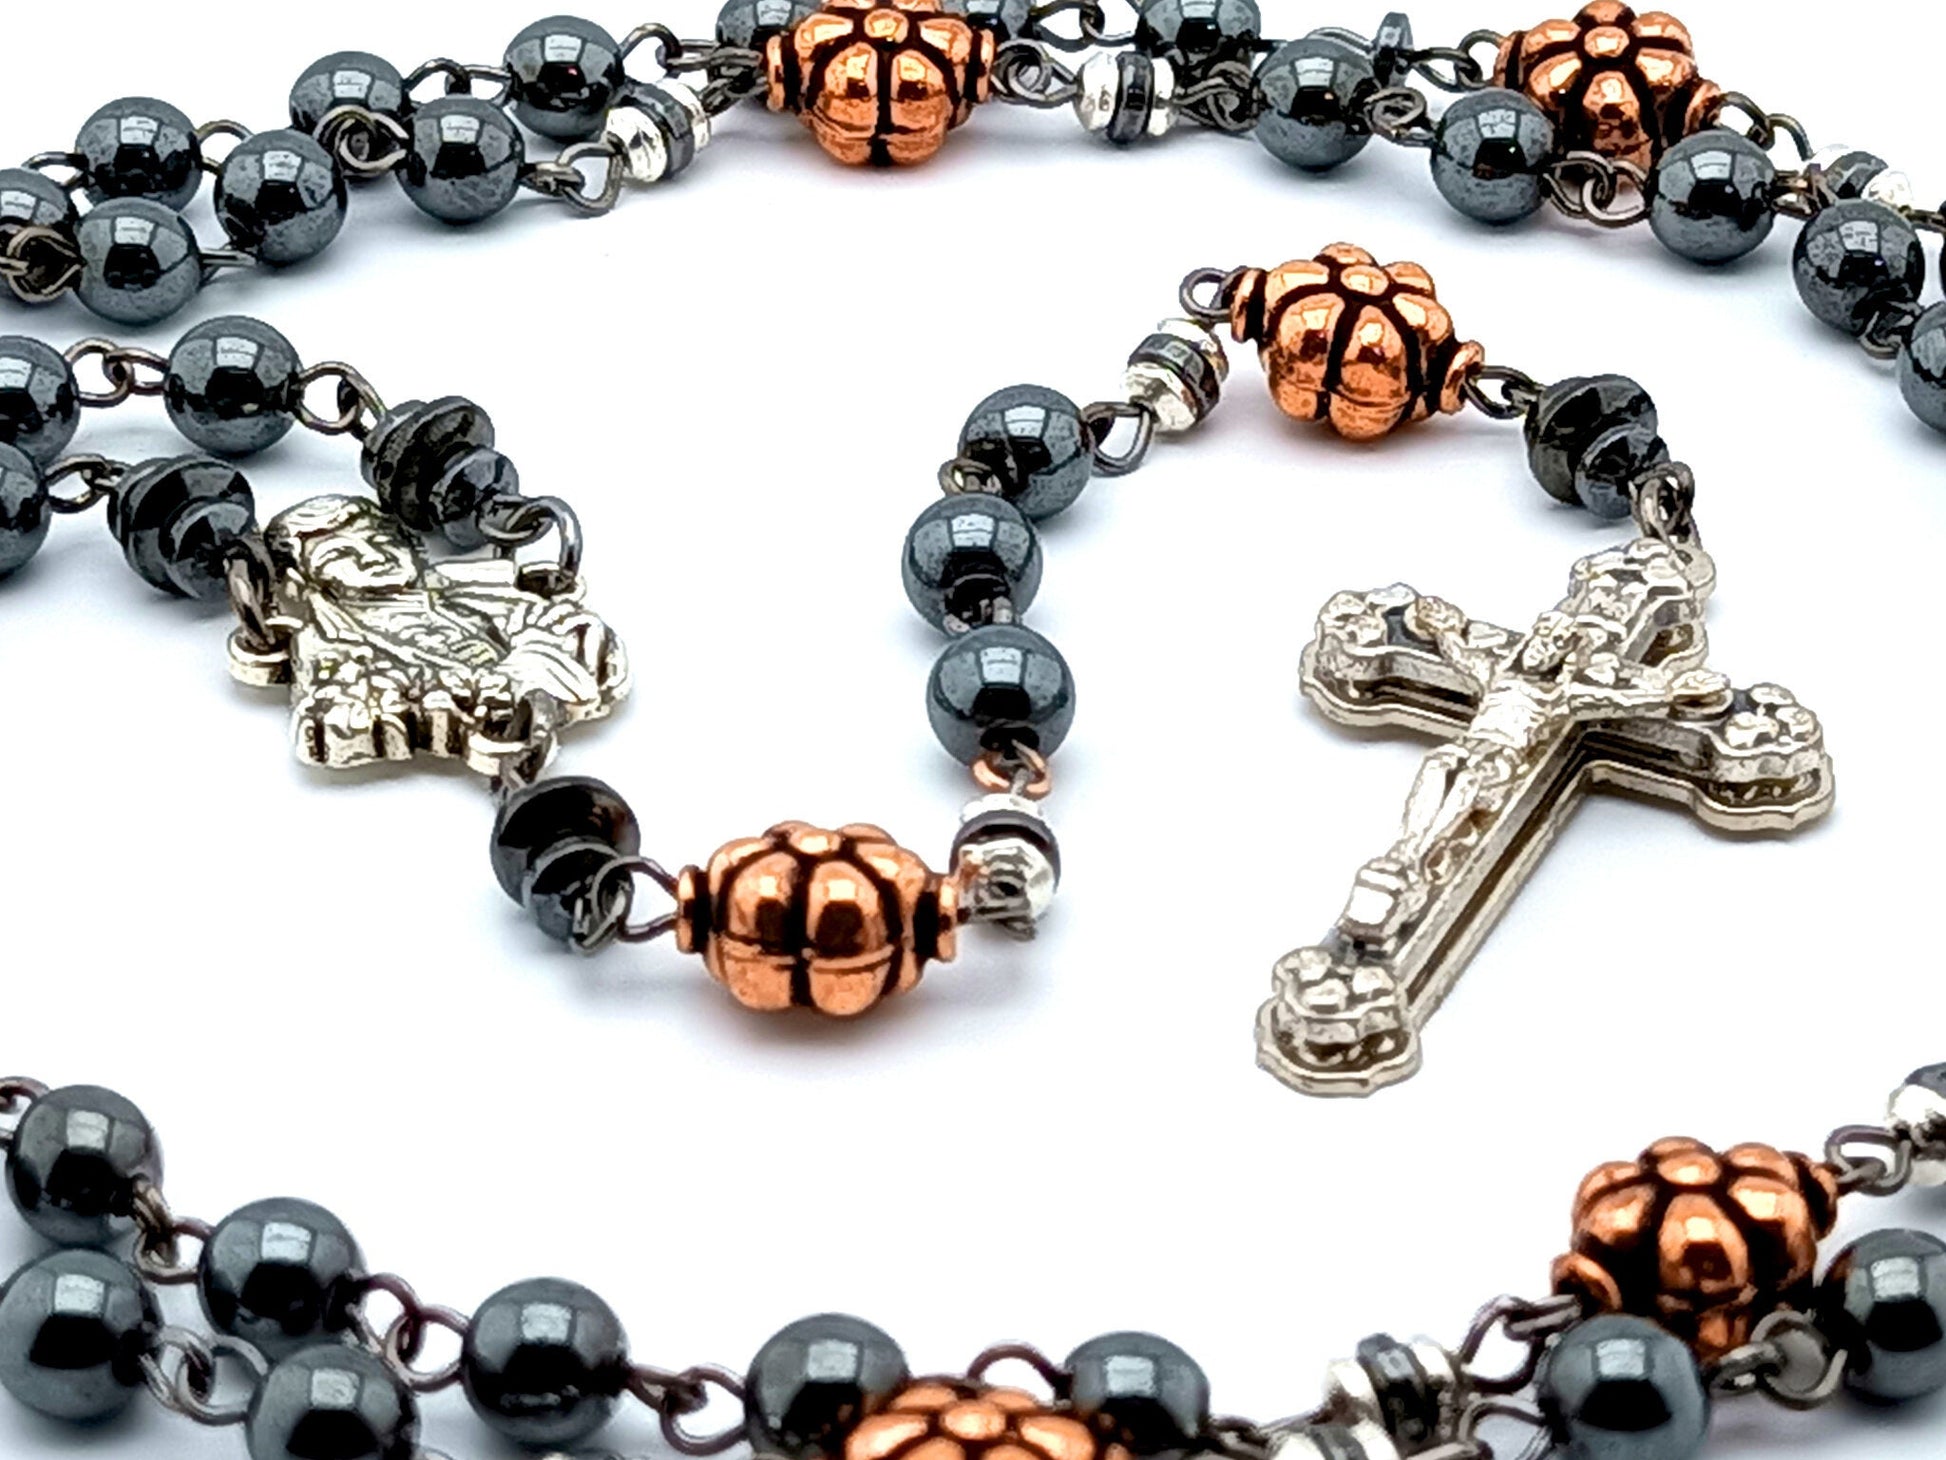 Saint Gabriel Possenti unique rosary beads with hemitite and copper beads, silver hearts crucifix and centre medal.